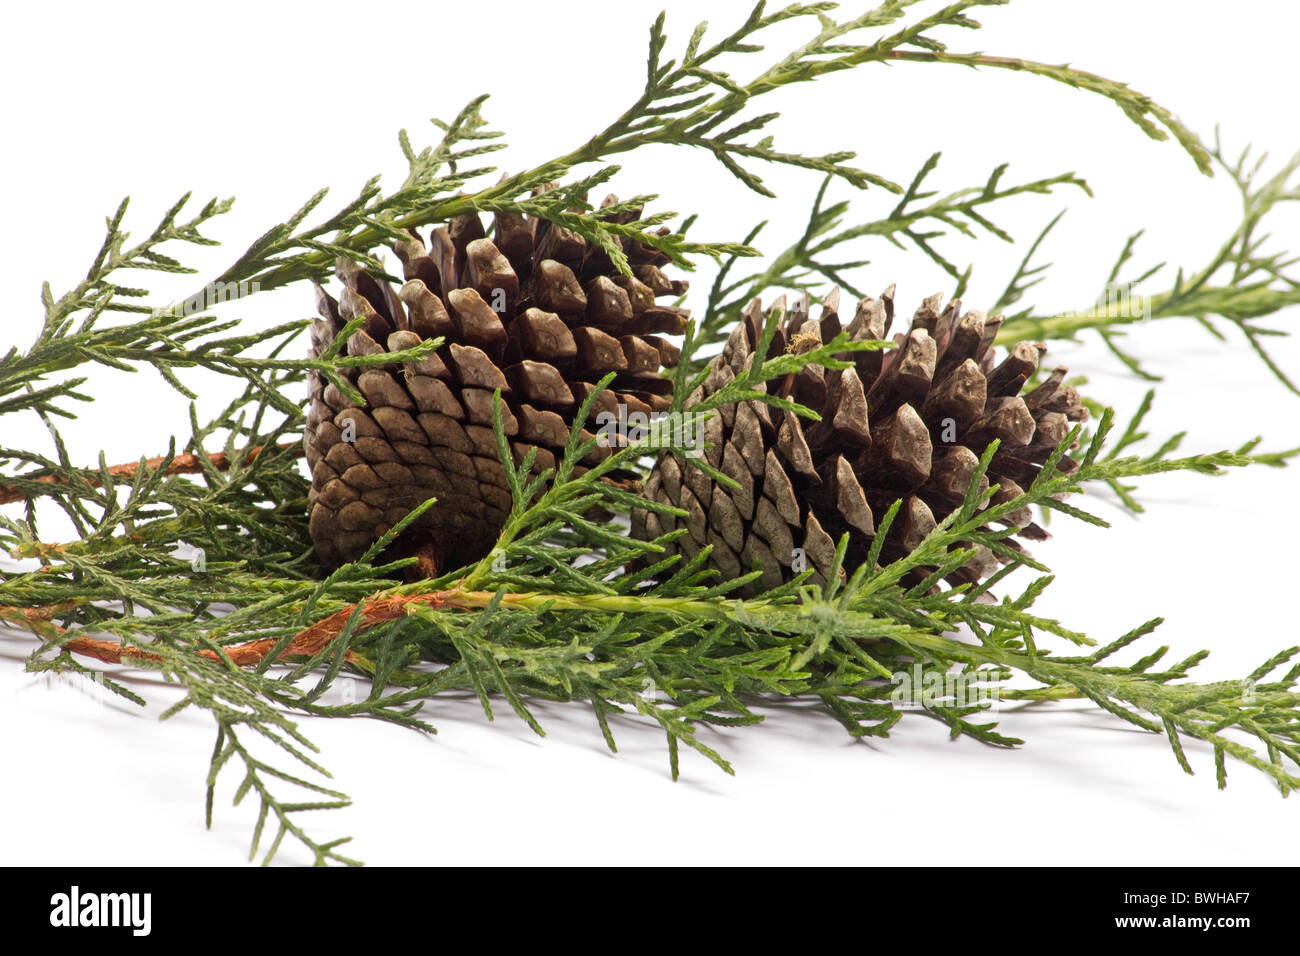 Close-up of pine cones and evergreen leaves on white background Stock Photo